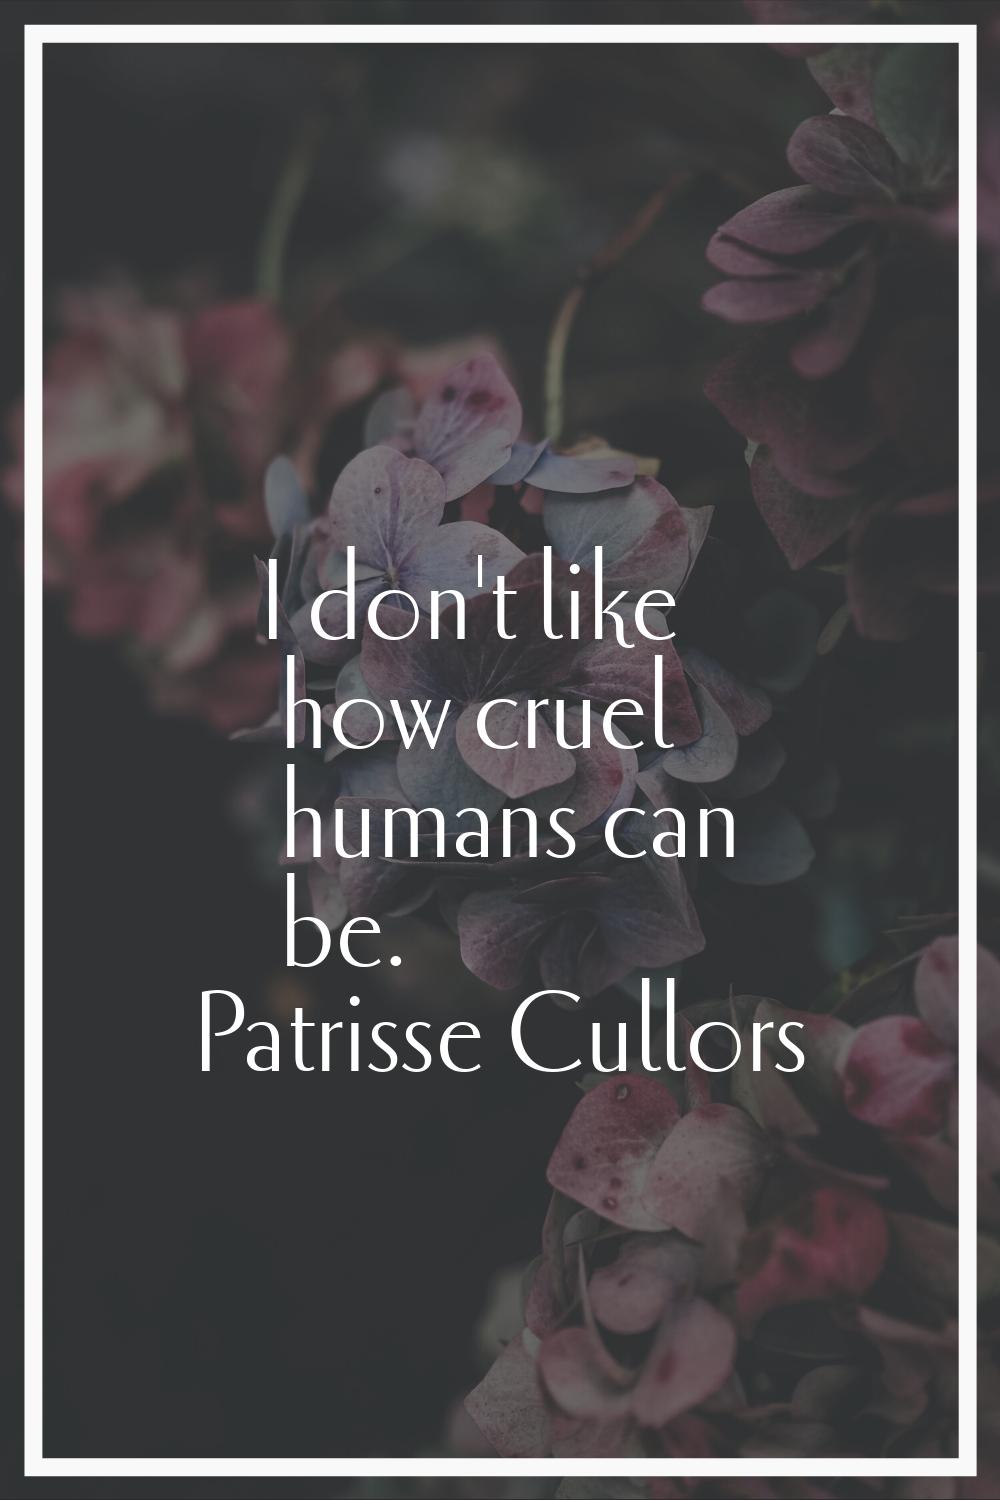 I don't like how cruel humans can be.